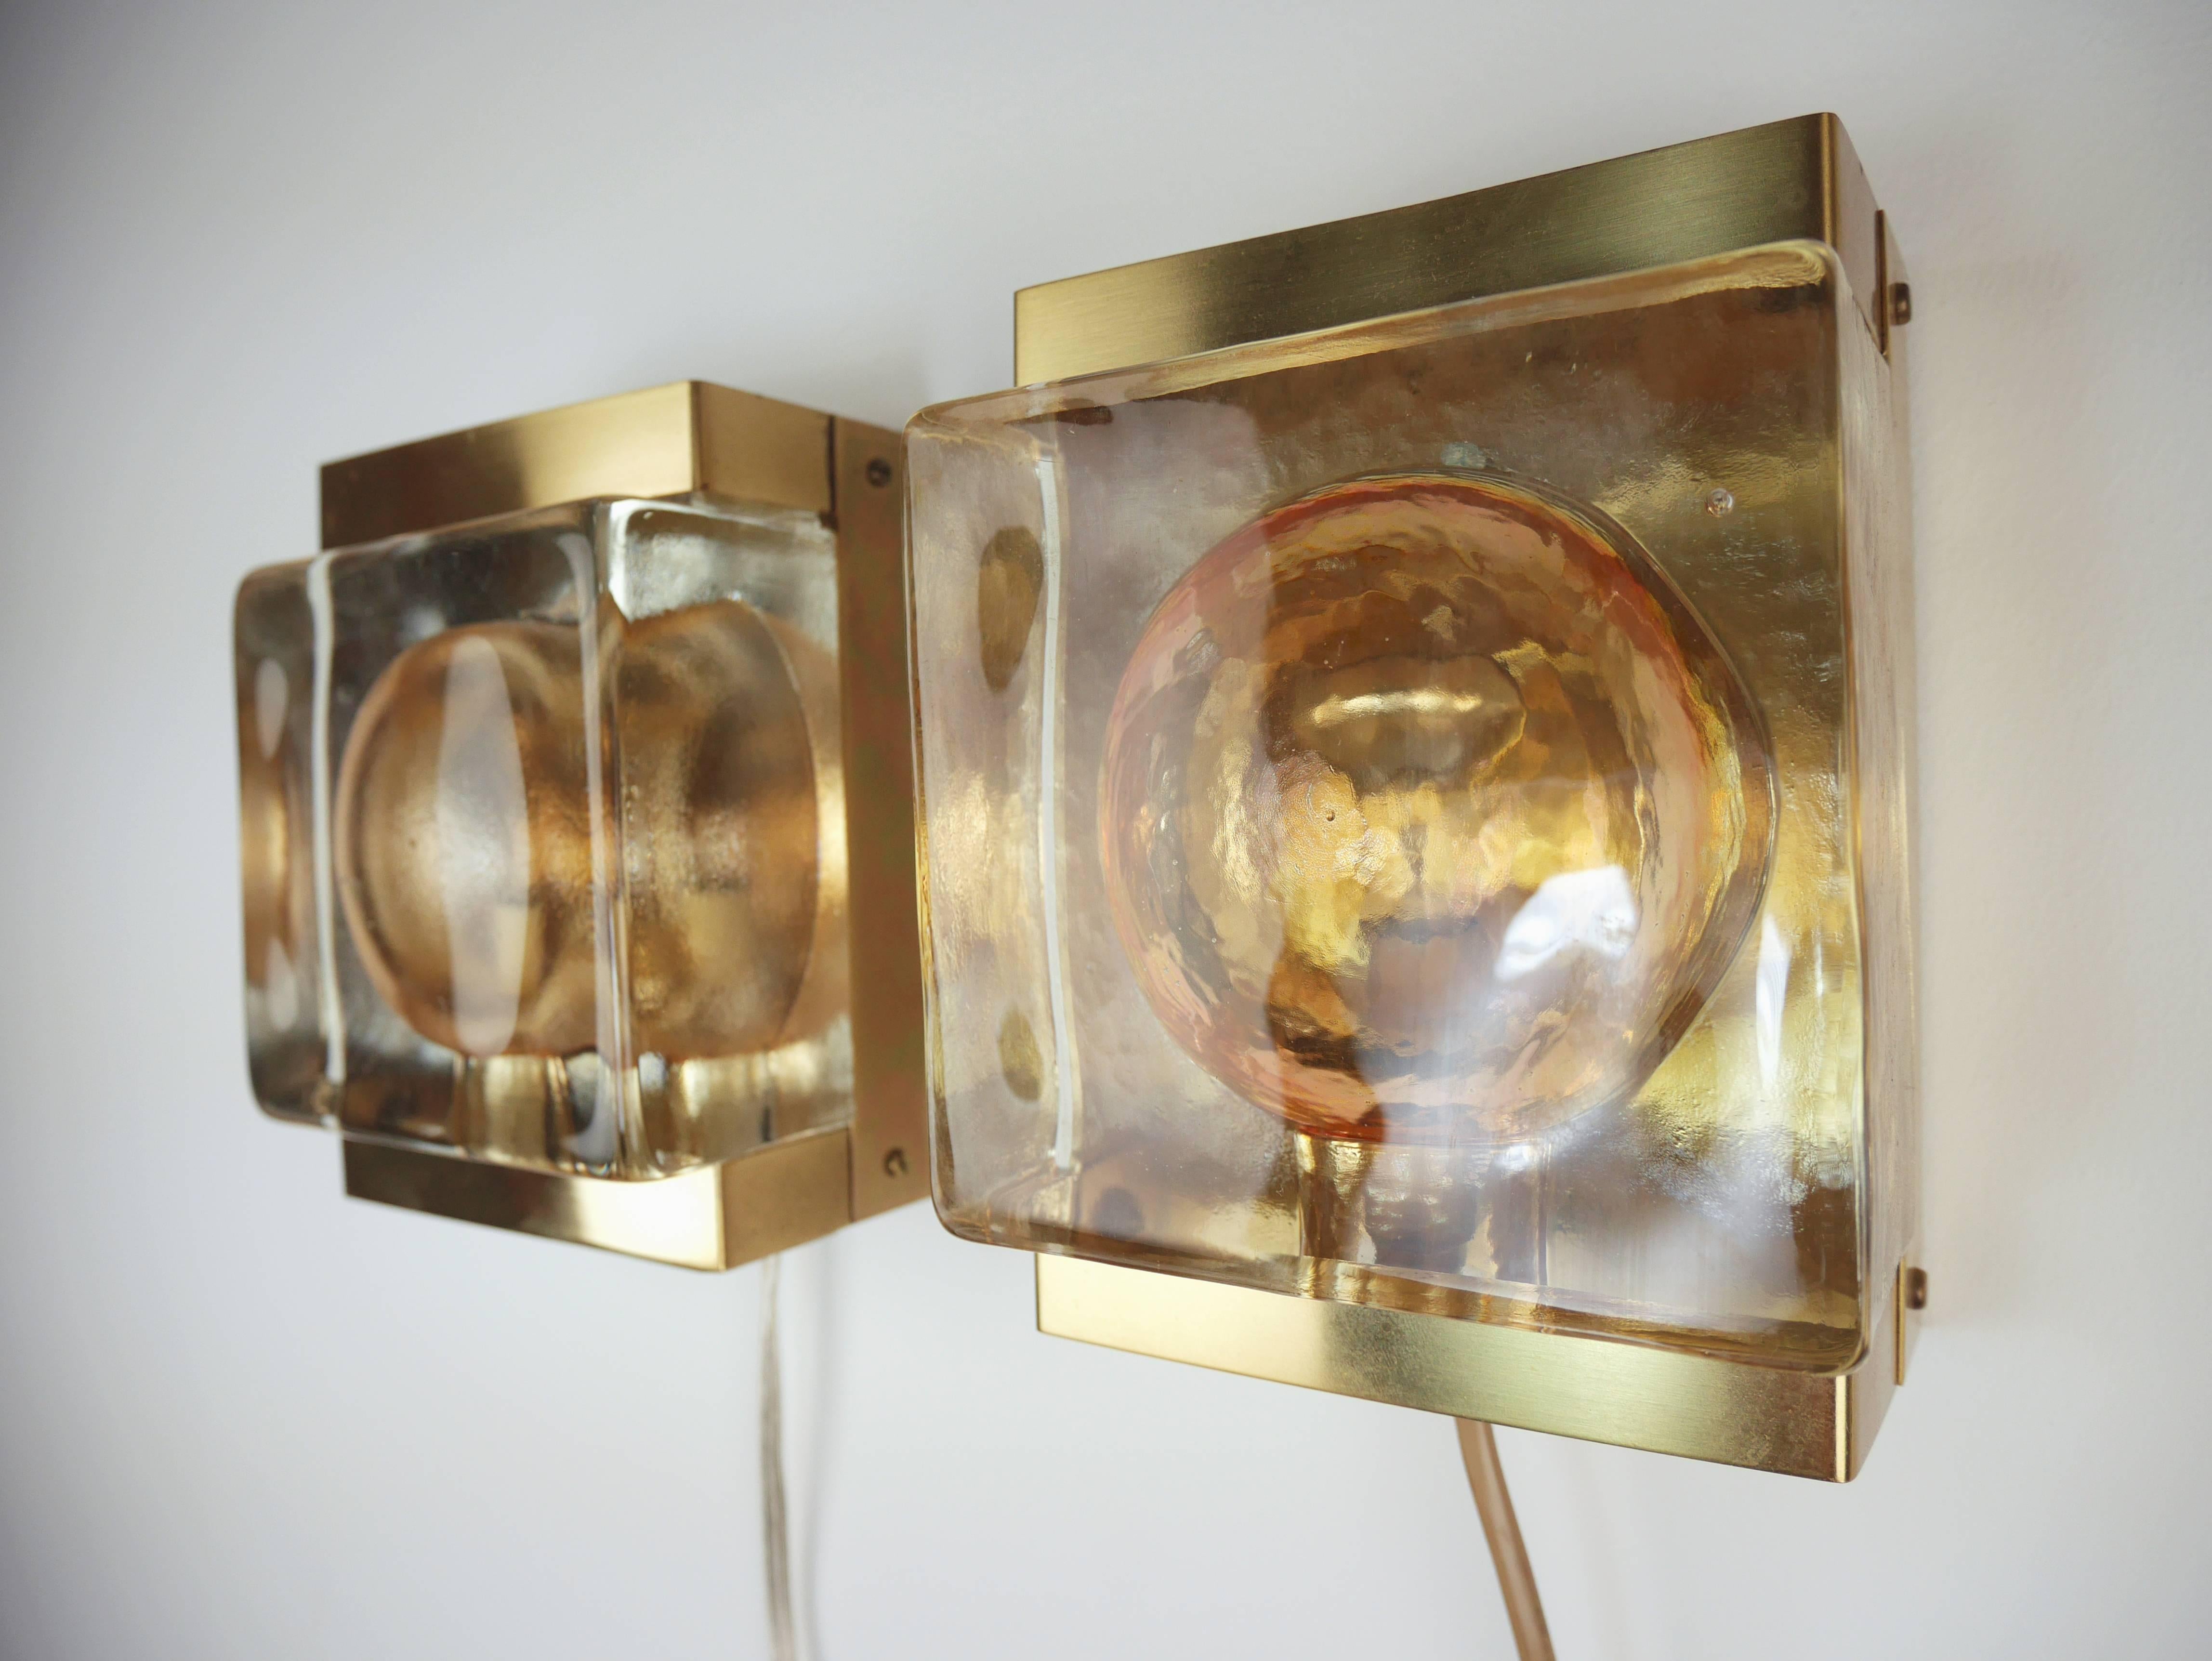 Exceptional handmade 1960s Danish Mid Century Modern wall lights by Vitrika. A block of thick solid champagne colored glass mounted on a shiny brass plate that closes around the top and bottom of the glass. The items are handmade so small